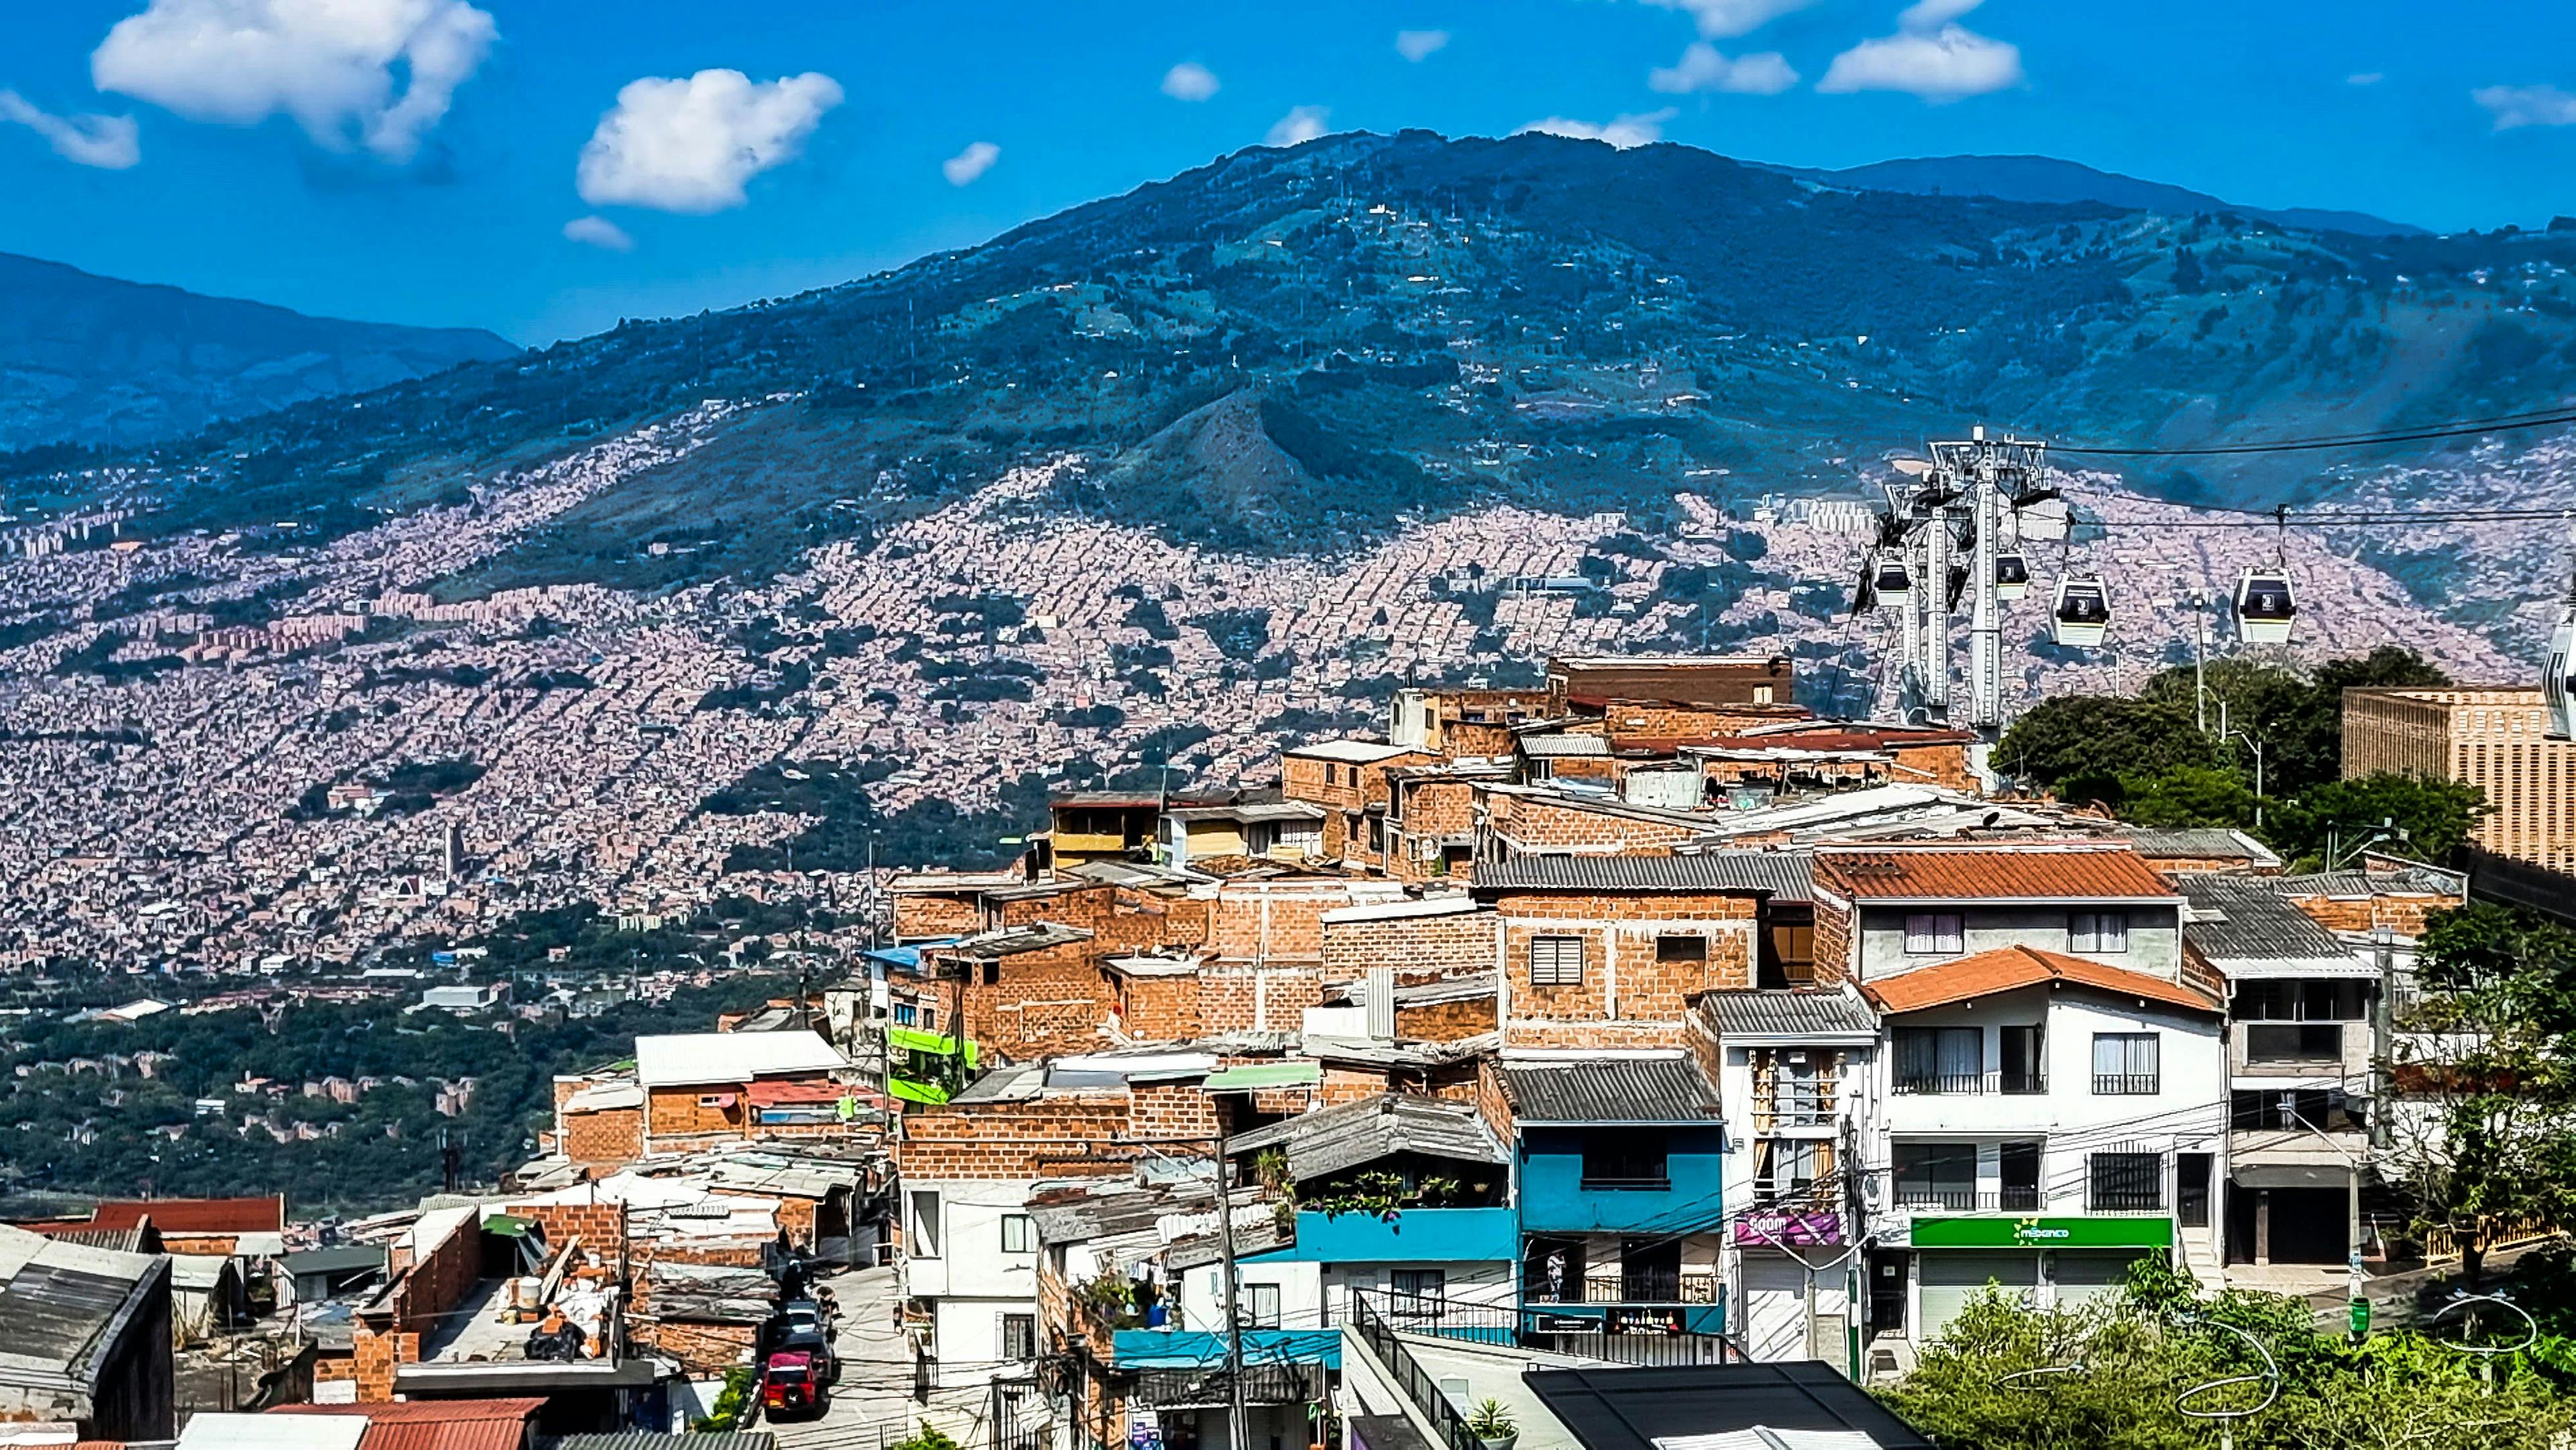 An Introduction to Being a Digital Nomad in Medellin